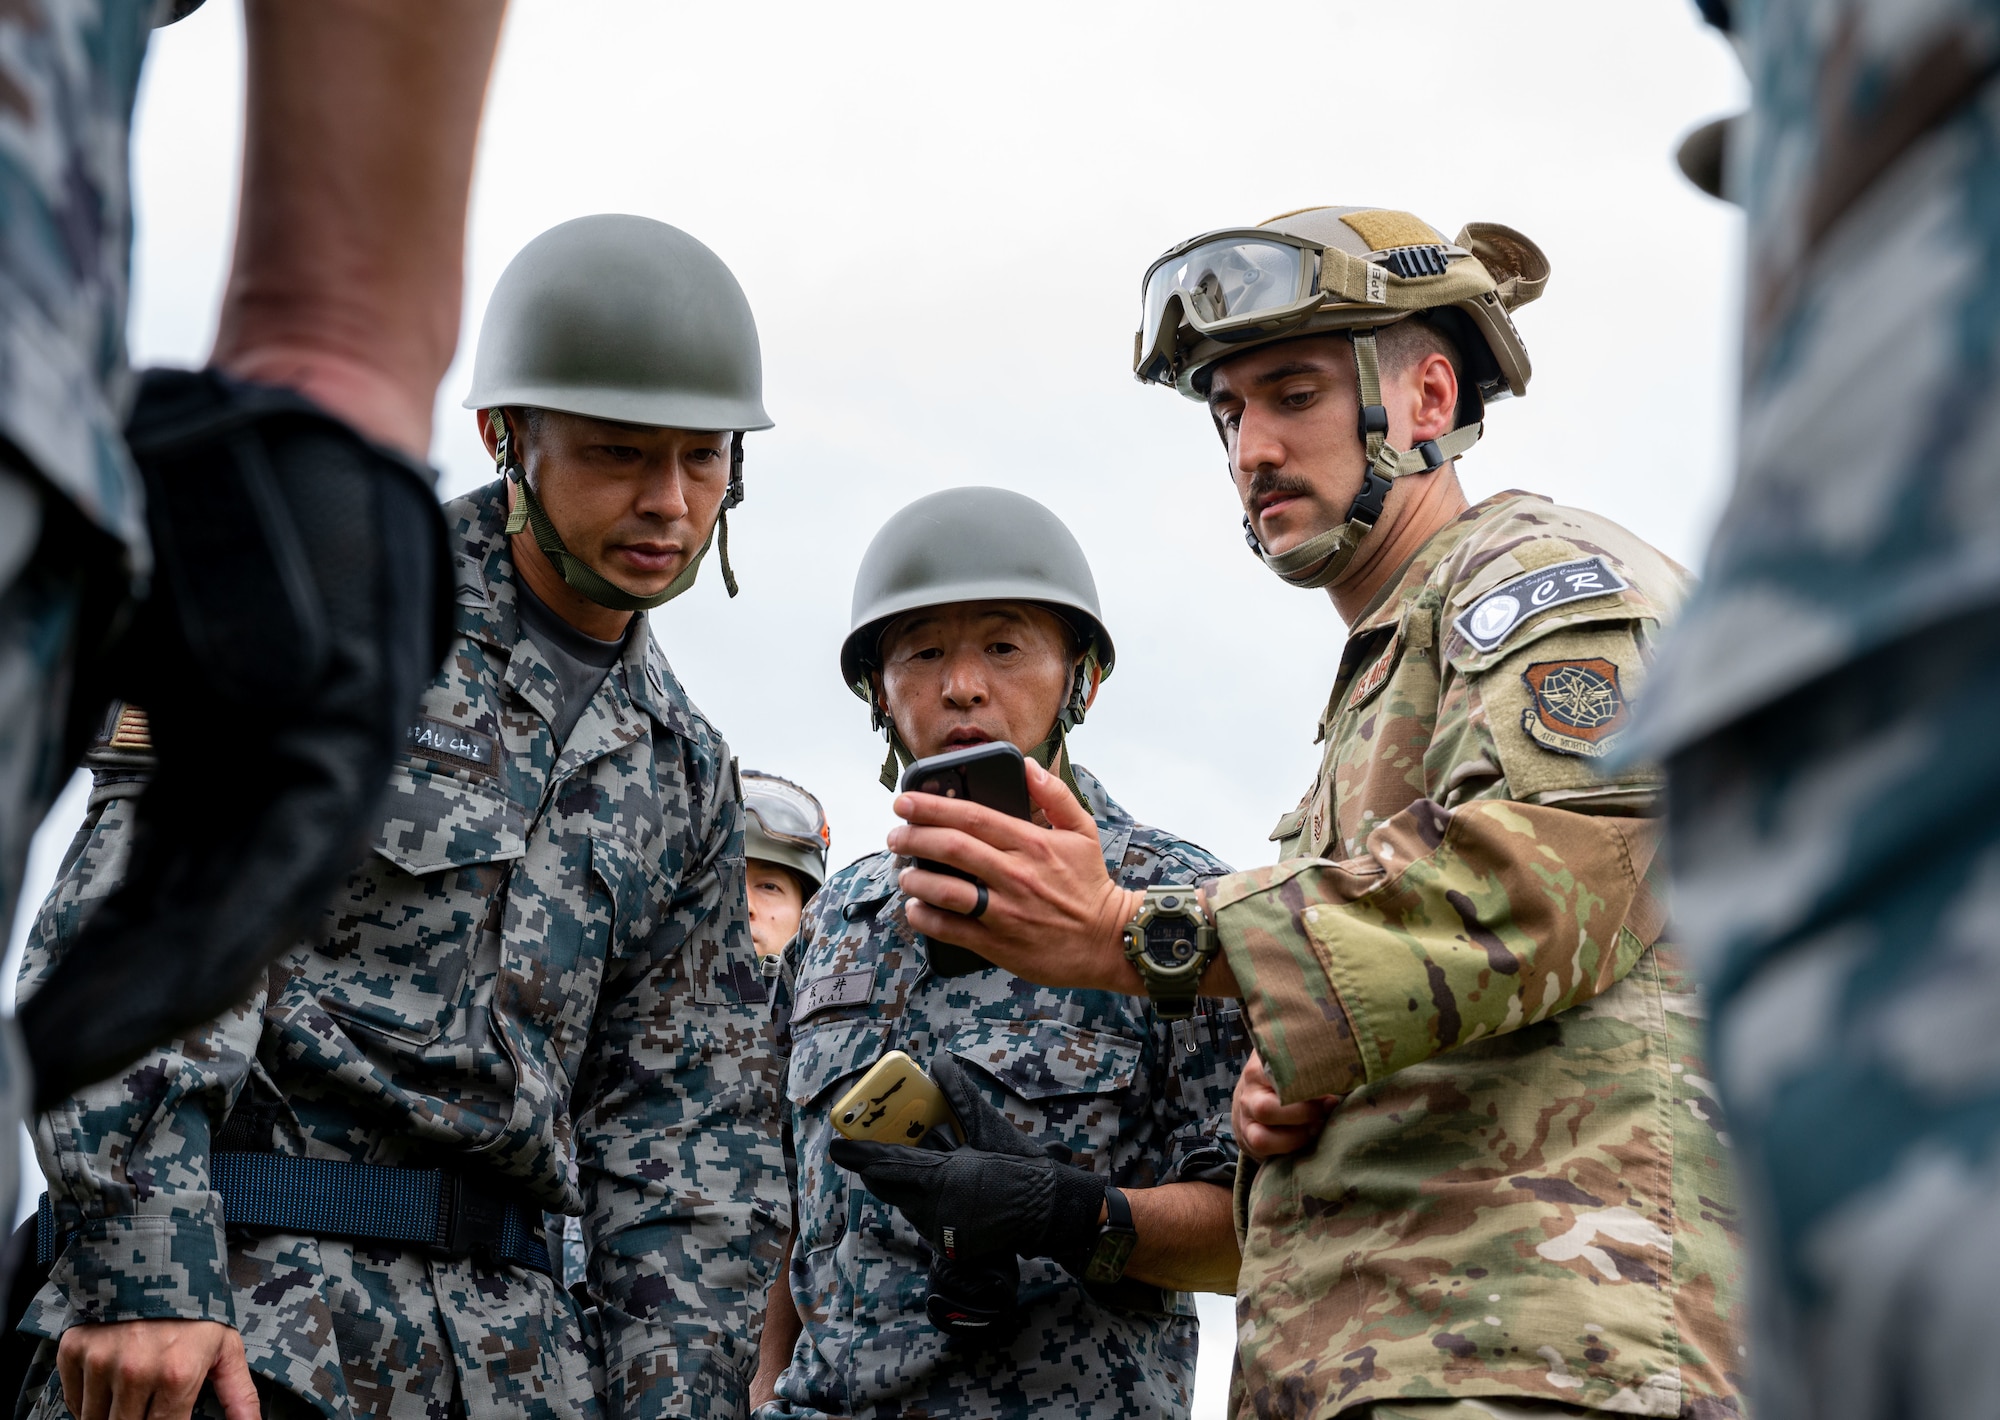 Tech. Sgt. Connor Starr, right, 821 Contingency Response Squadron fuels UTC lead, uses his phone to communicate instructions during a specialized fuel operations in support of Mobility Guardian 2023 at  Yakumo sub-base, Japan, July 12, 2023. A multilateral endeavor, MG23 features seven participating countries - Australia, Canada, France, Japan, New Zealand, United Kingdom, and the United States - Operating approximately 70 mobility aircraft across multiple locations spanning a 3,000 miles exercise are from July 5 through July 21.